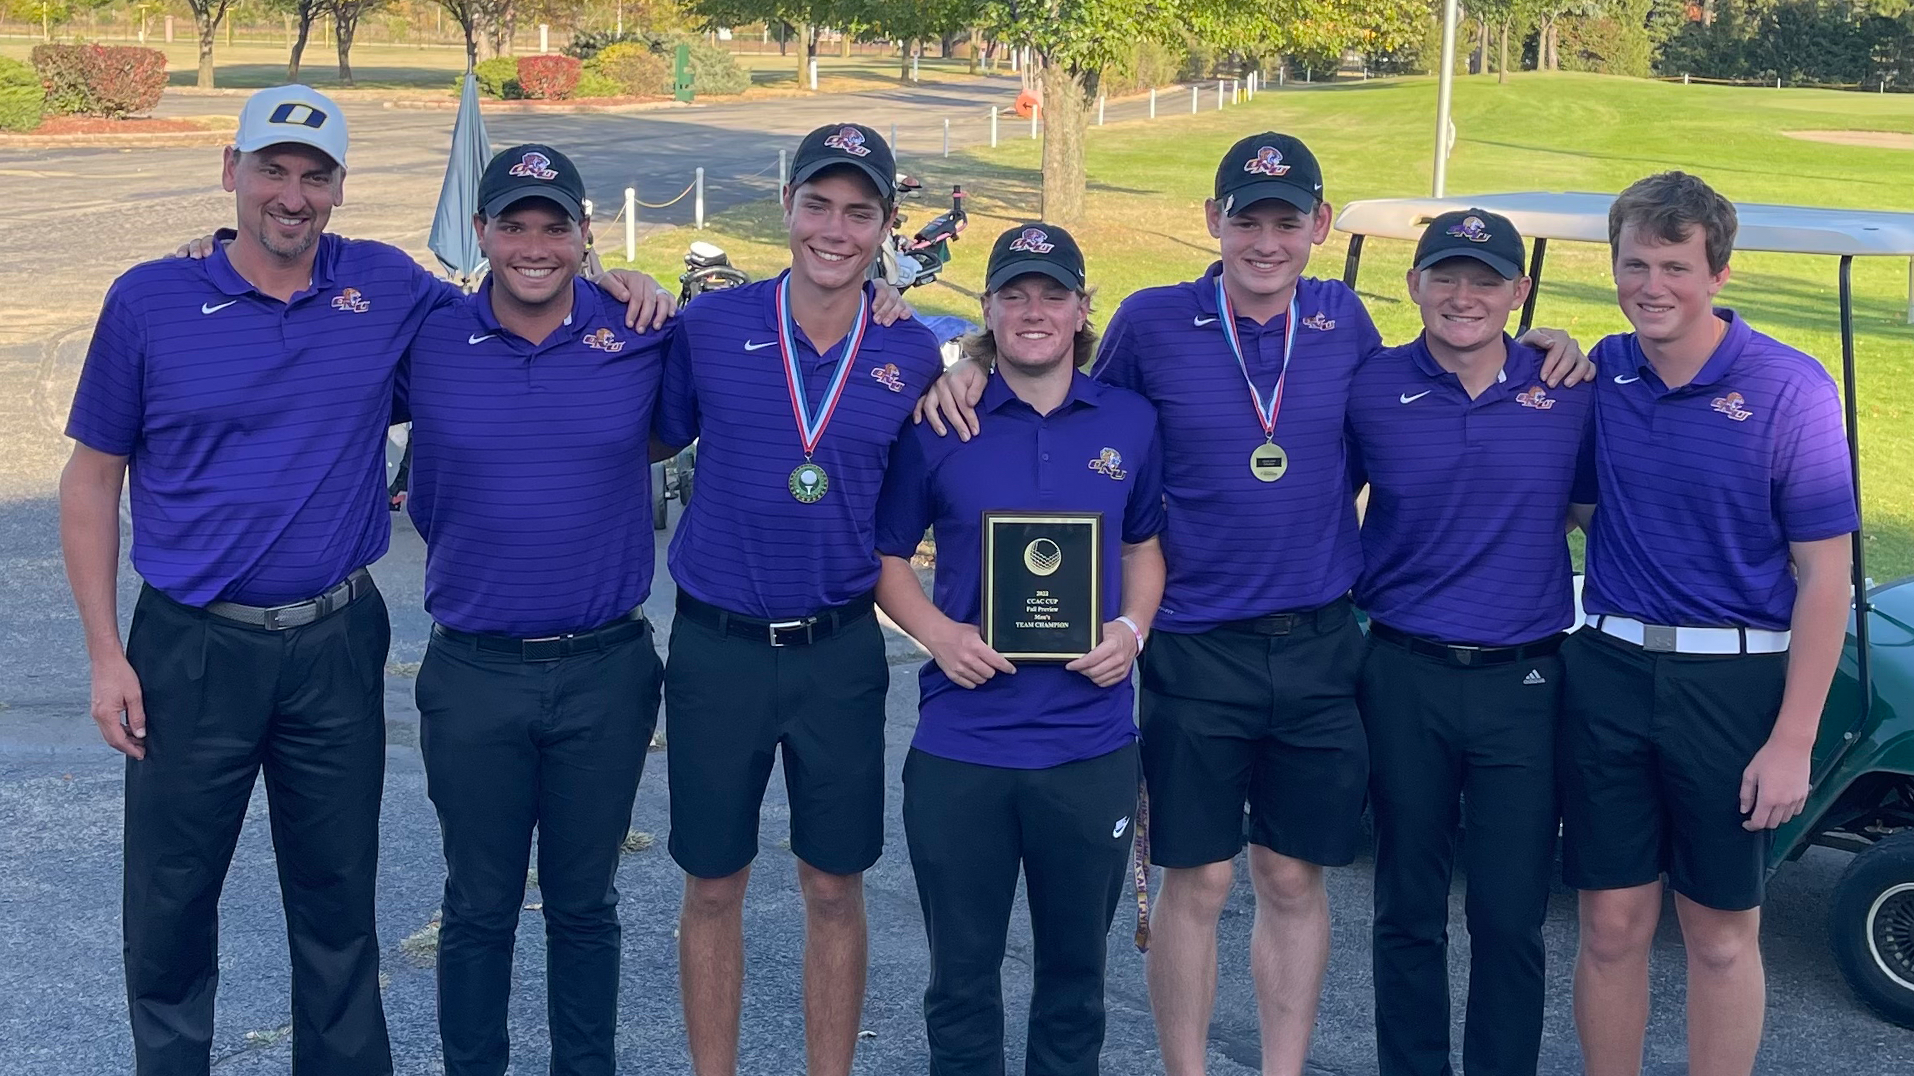 ONU MEN WIN CCAC FALL PREVIEW CUP TO CLOSE OUT FALL SEASON